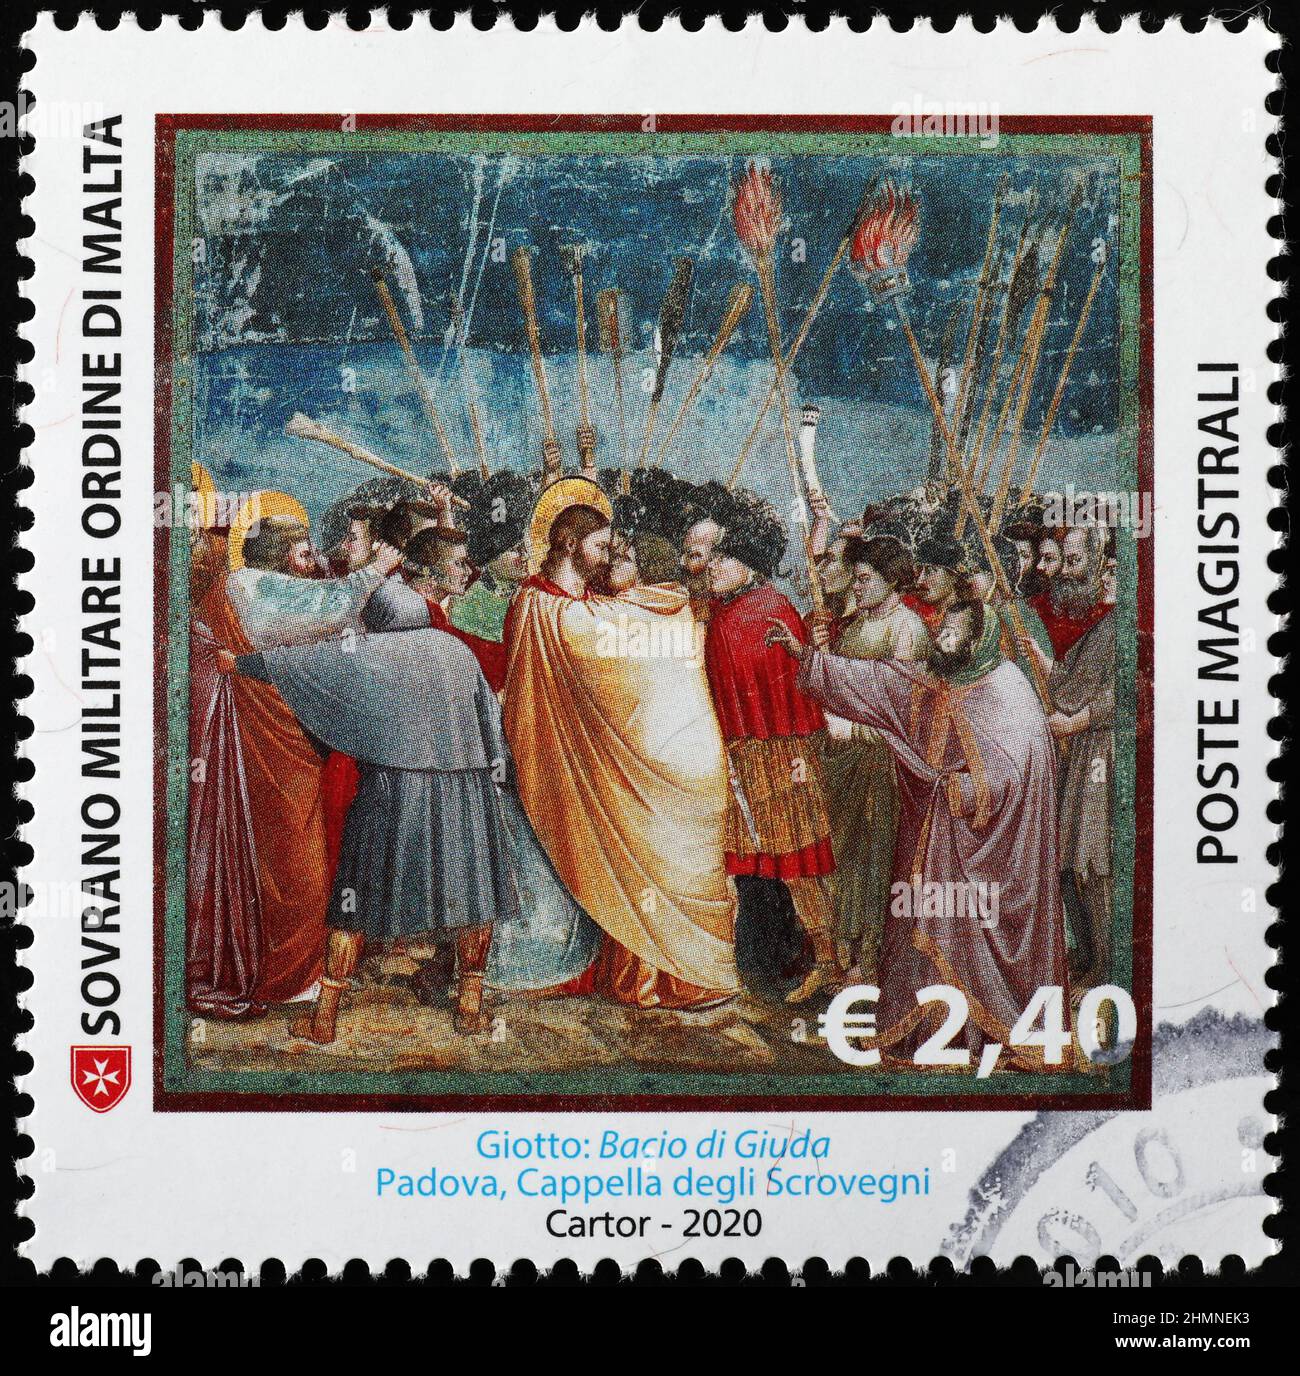 Kiss of Judas by Giotto on postage stamp Stock Photo